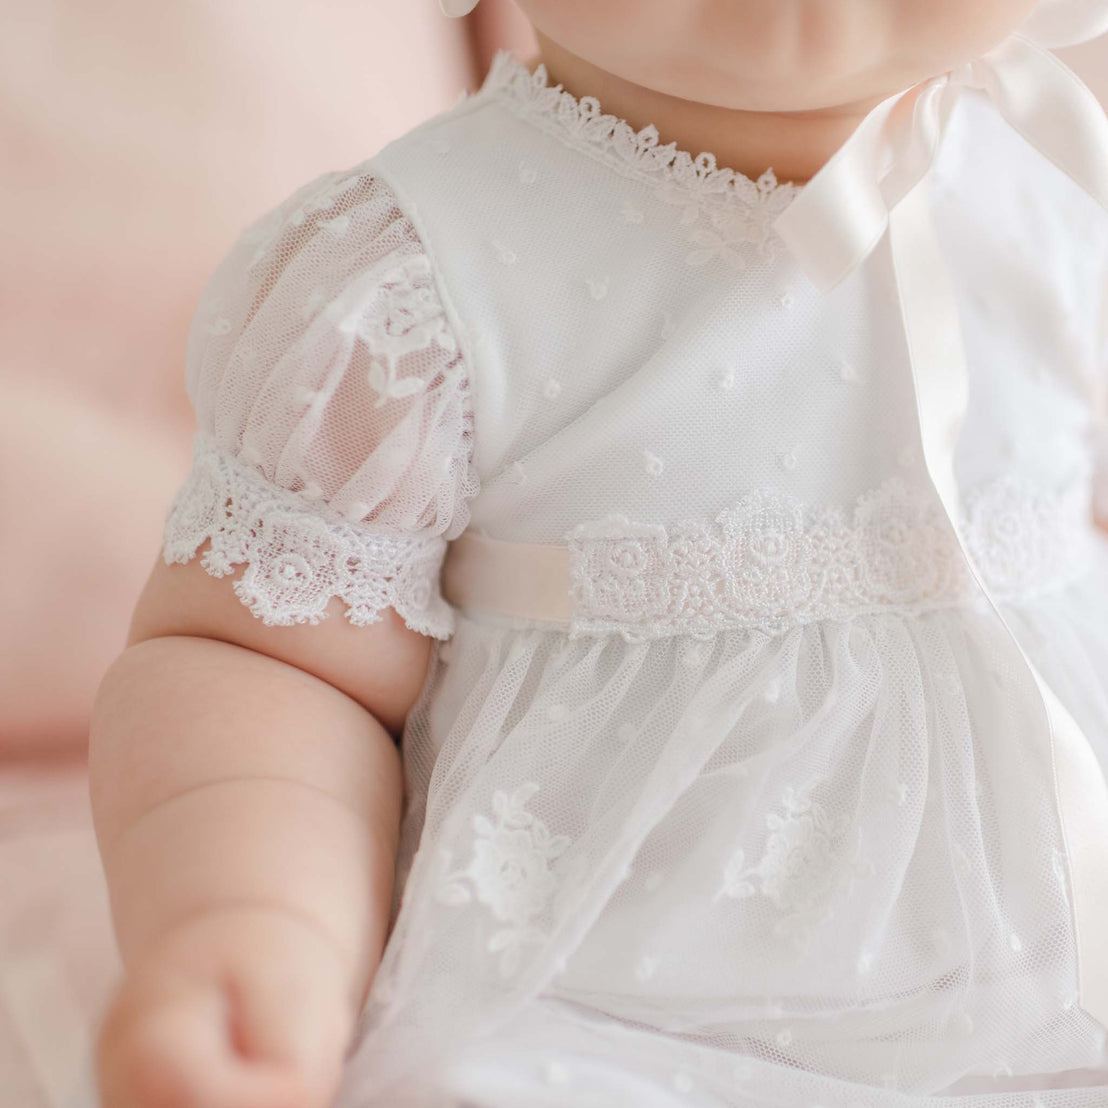 A close-up of a baby wearing a delicate, white Melissa Christening Gown & Bonnet with short, puffed sleeves adorned with intricate Venice lace trim. The baby's arm is extended, and a satin ribbon bow is visible near the neck. The background is softly blurred in pastel tones.